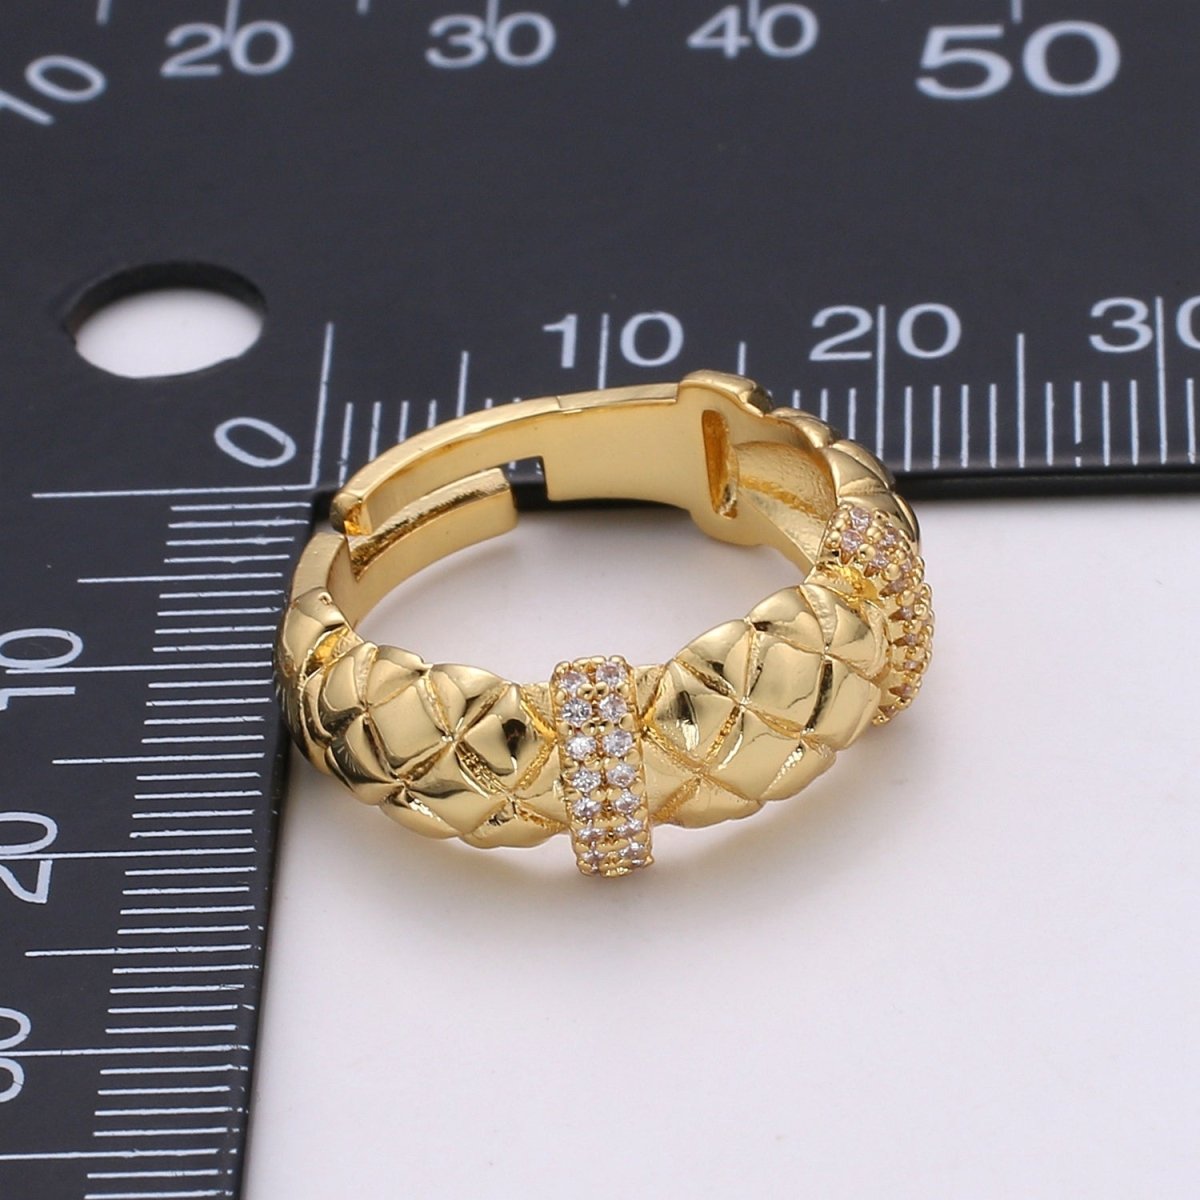 Gold Croissant Ring, Cz Twist Ring, Chunky Ring, Adjustable Ring, Statement Ring, Twisted Ring, Rope Ring Gift for Her Valentine Gift R-202 - DLUXCA